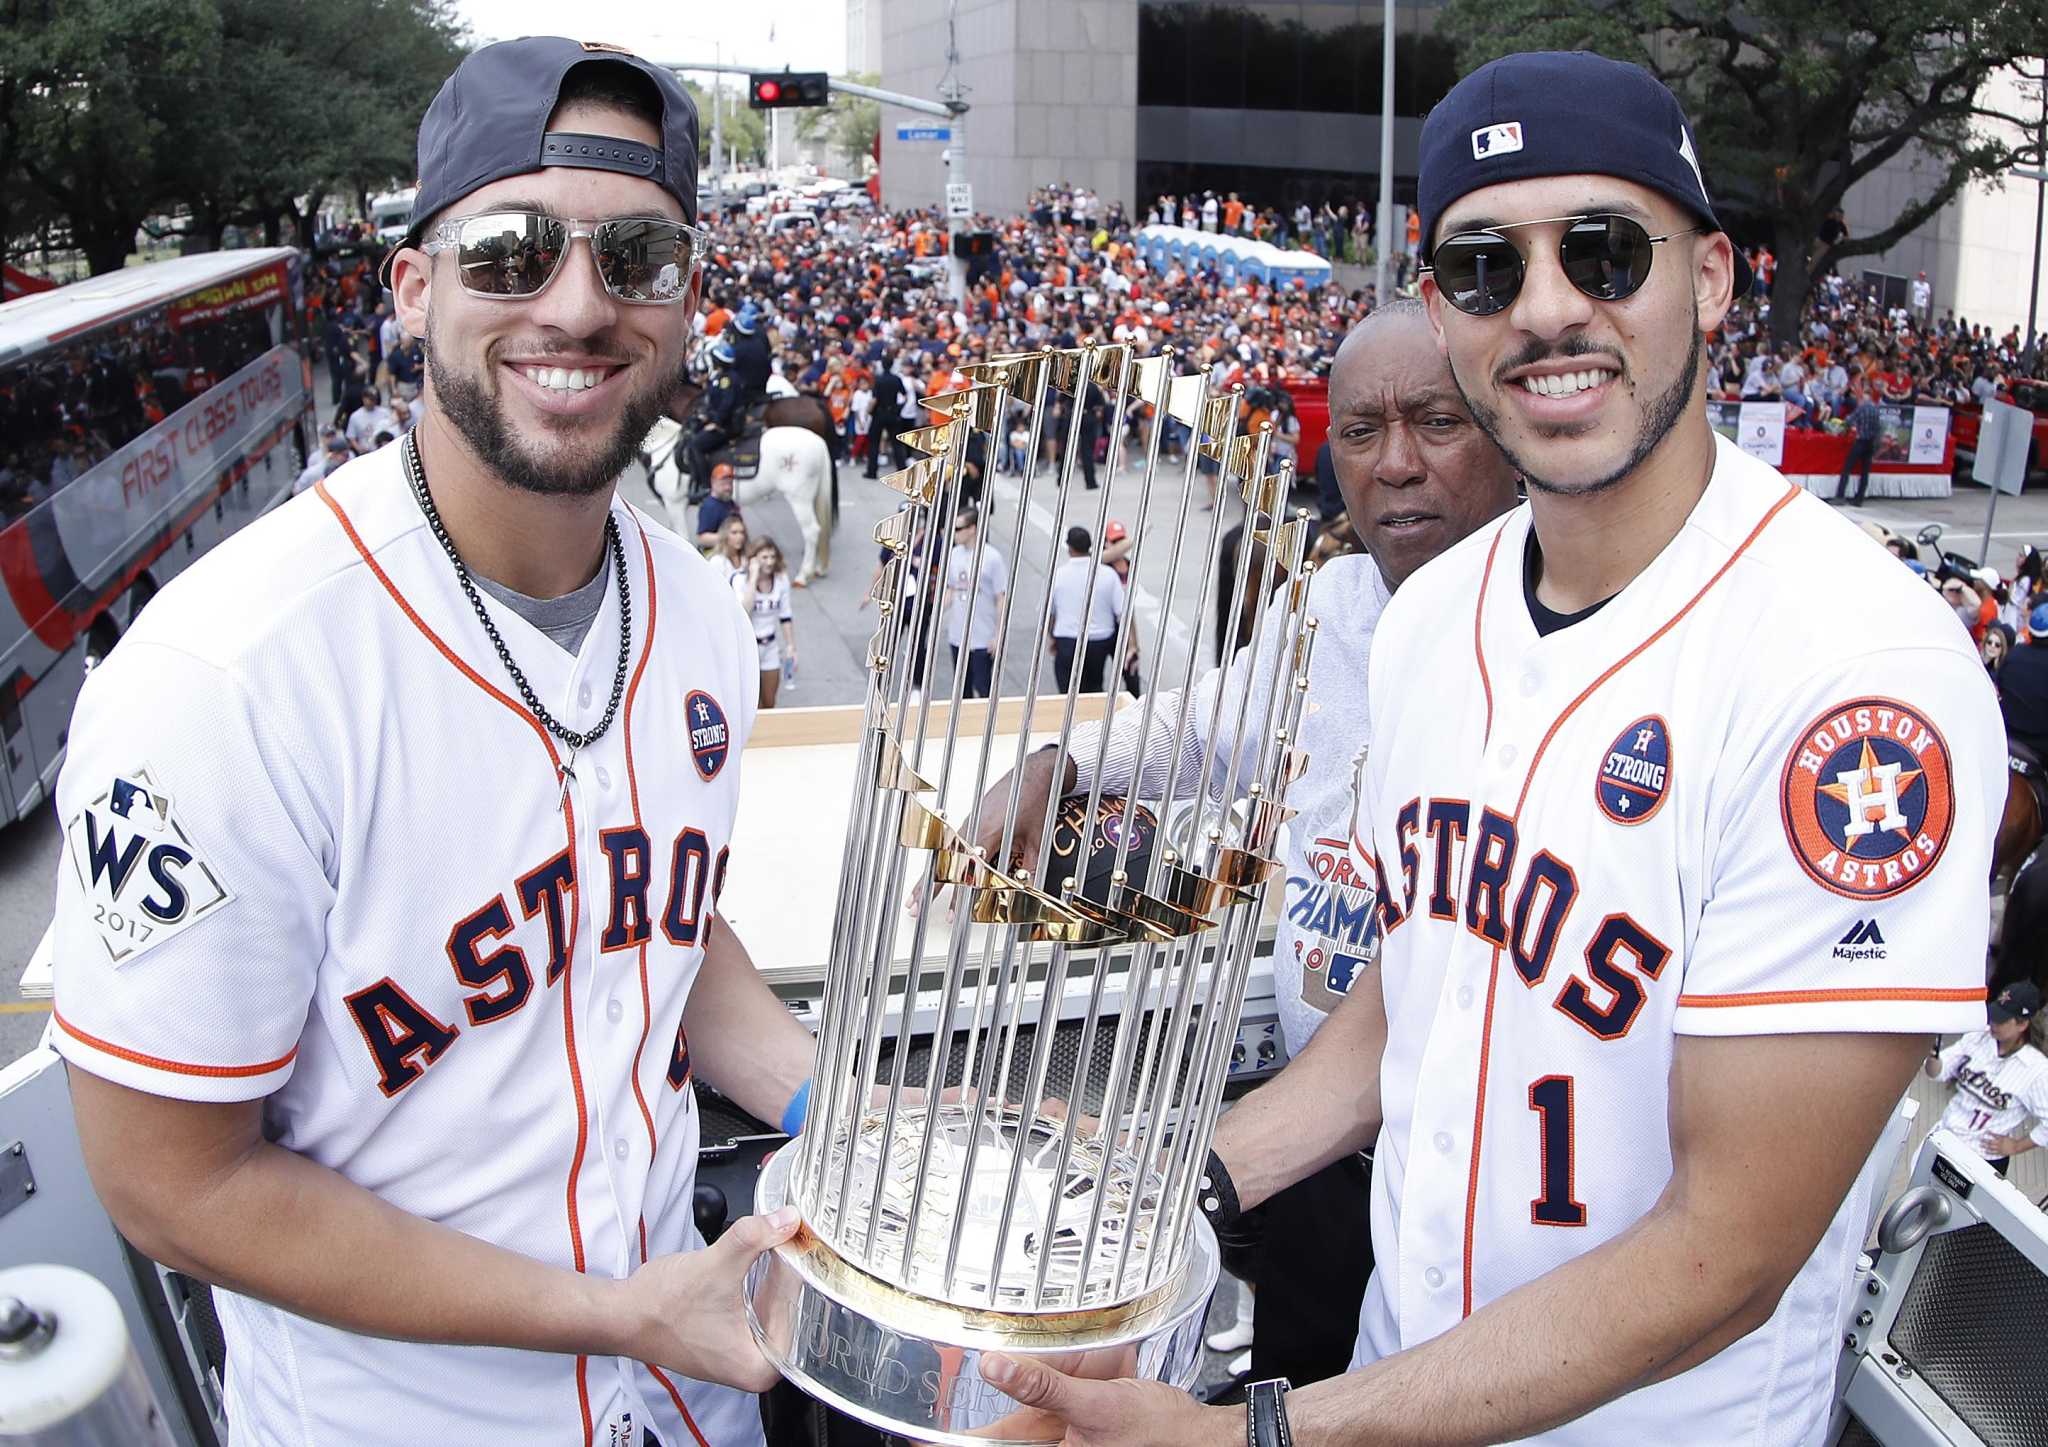 How the Astros can keep both George Springer, Carlos Correa for a long time